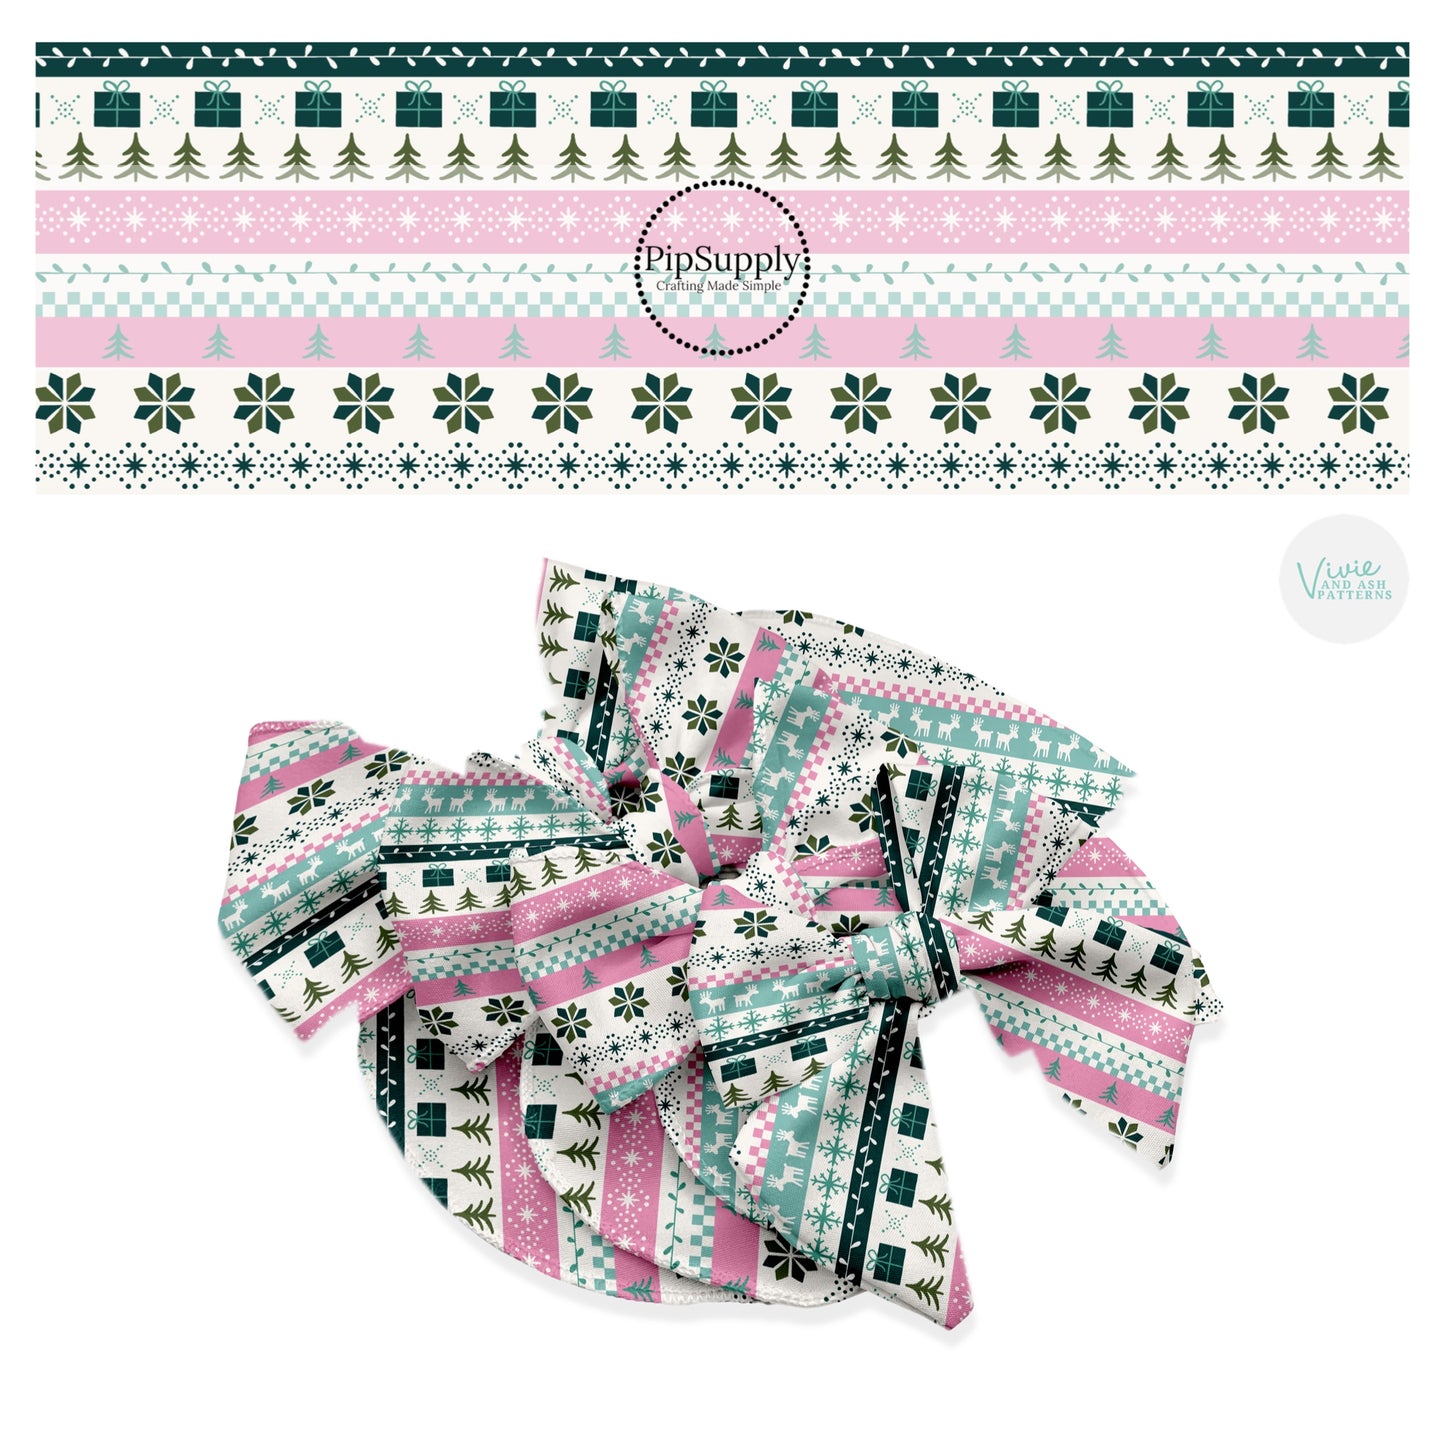 Striped winter sweater patterned hair bow strips